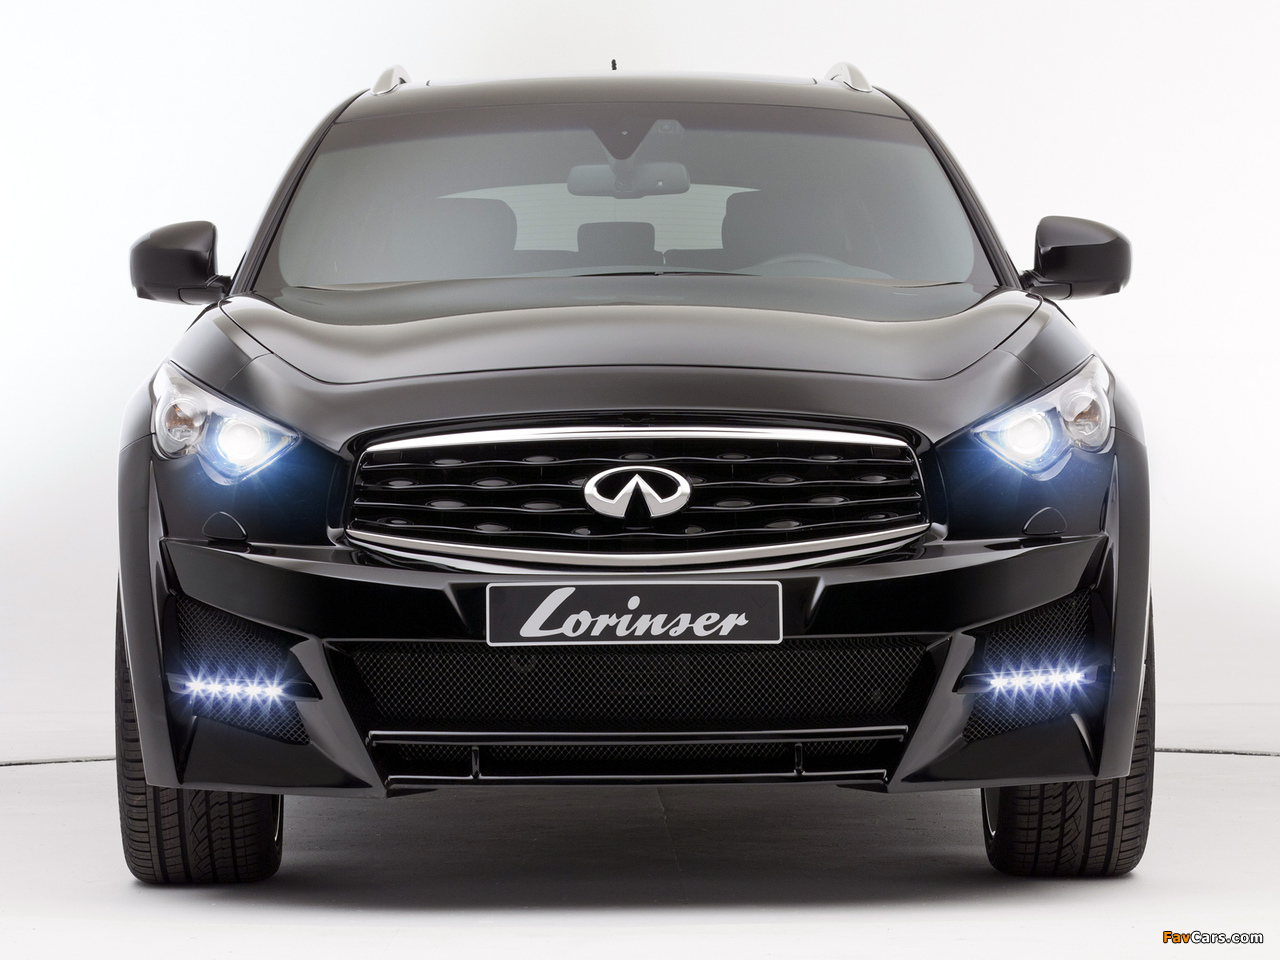 Lorinser Infiniti FX30dS (S51) 2011 pictures (1280 x 960)